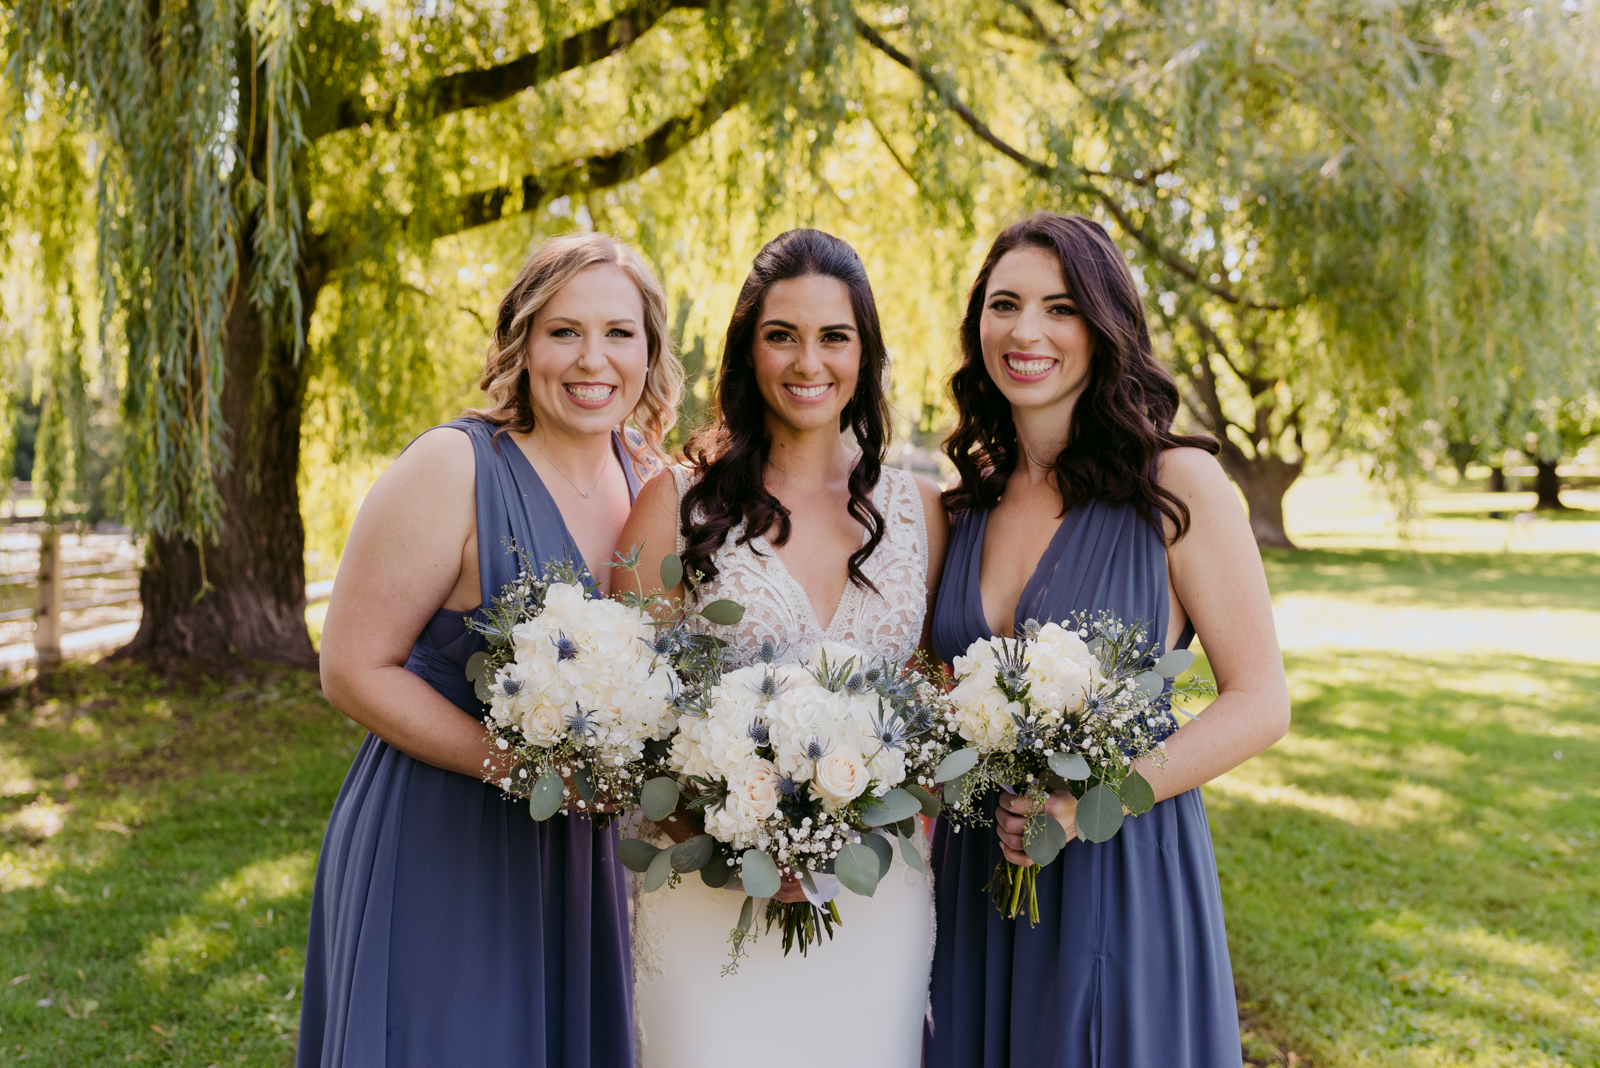 bride and bridesmaids in purple by willow trees by patterson's creek